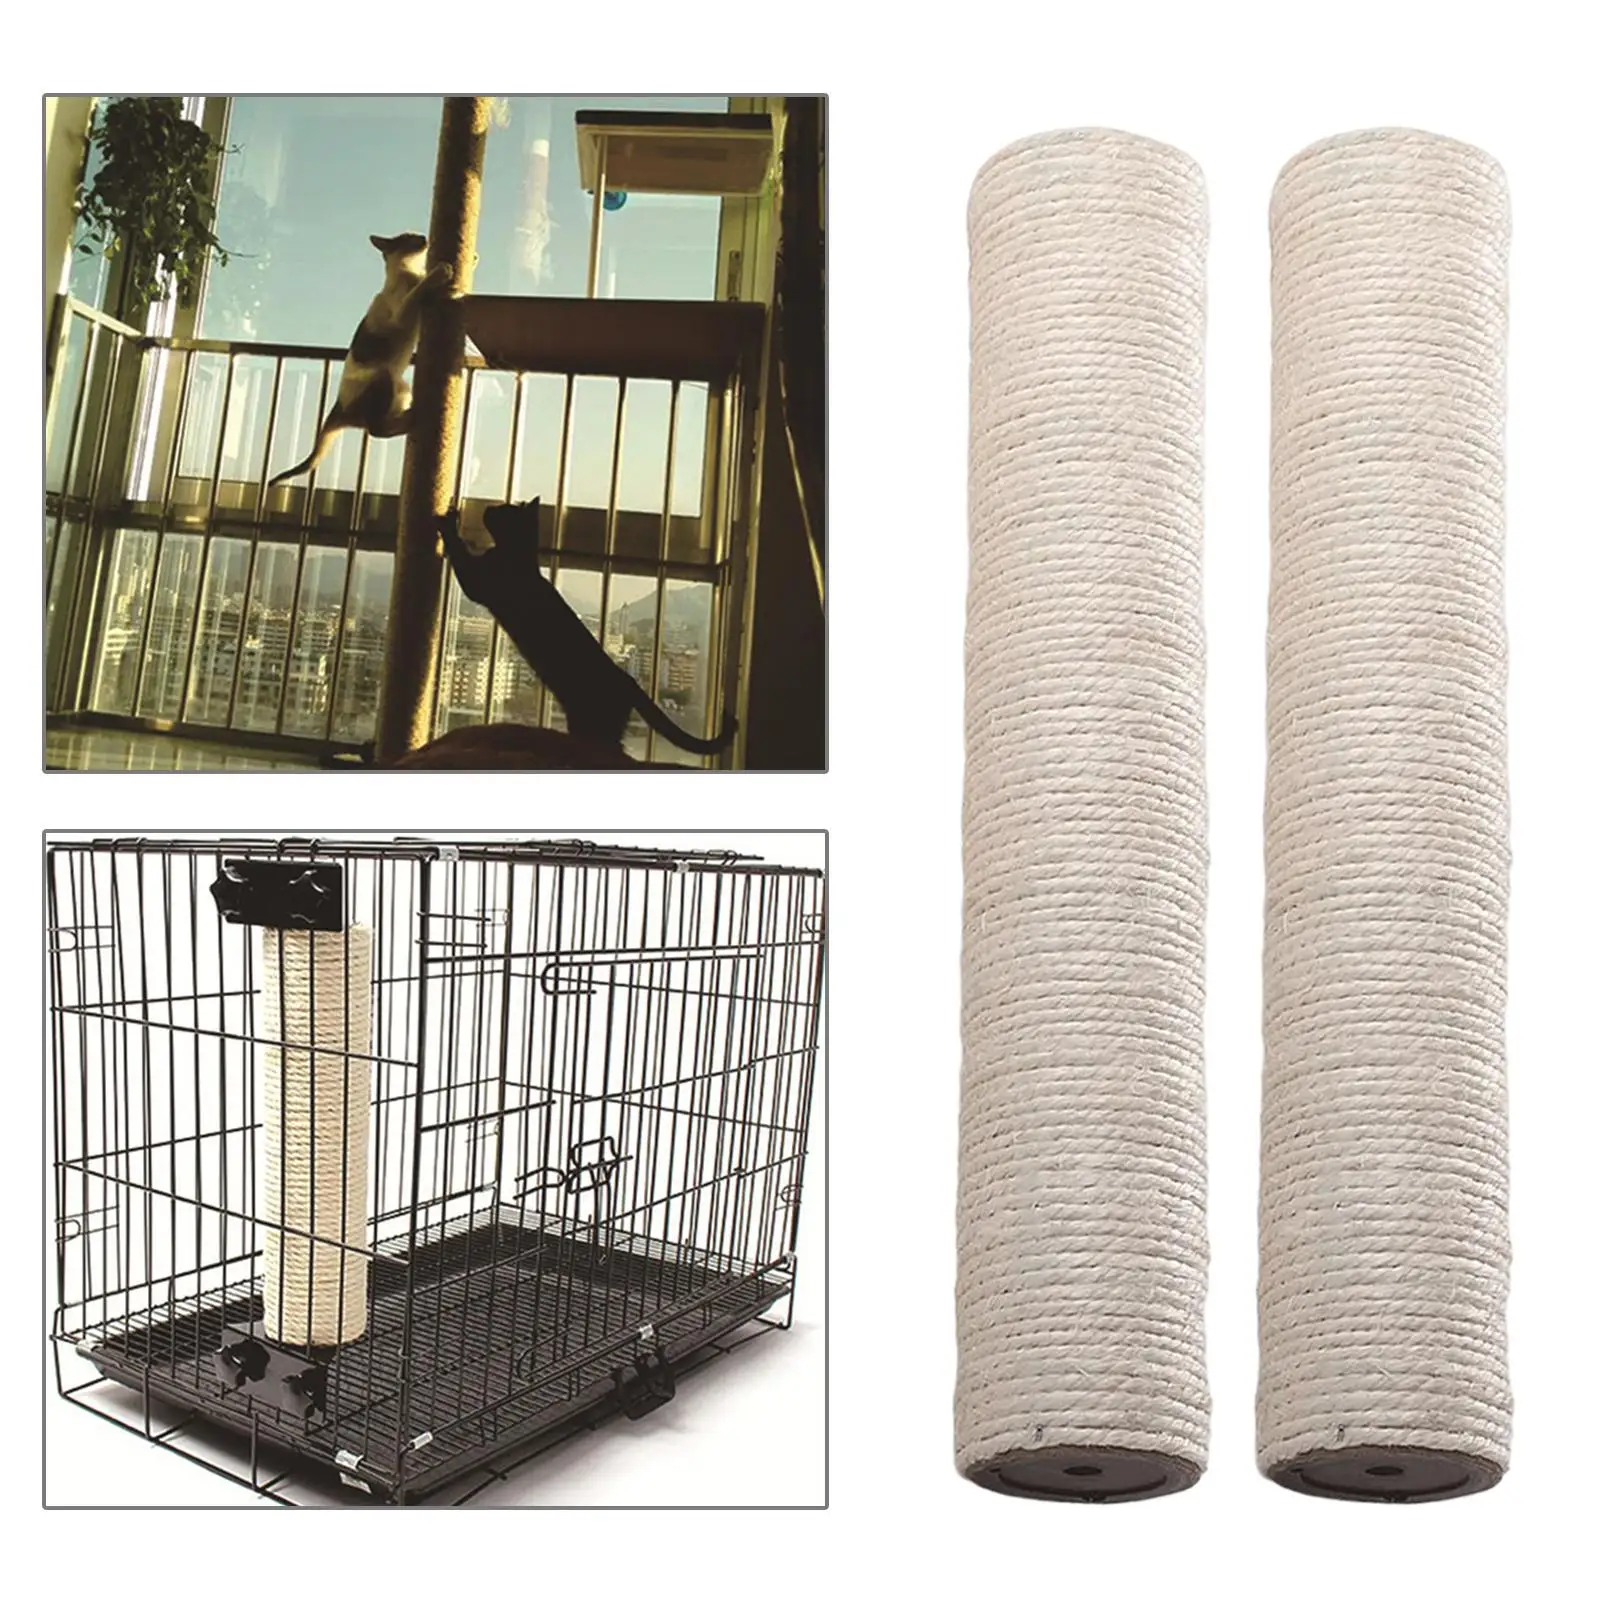 Cotton Rope Scratching Post Replacement Dia 2.75in Cats Climbing Post Scratch Posts Refills for Cats Kitten Pet